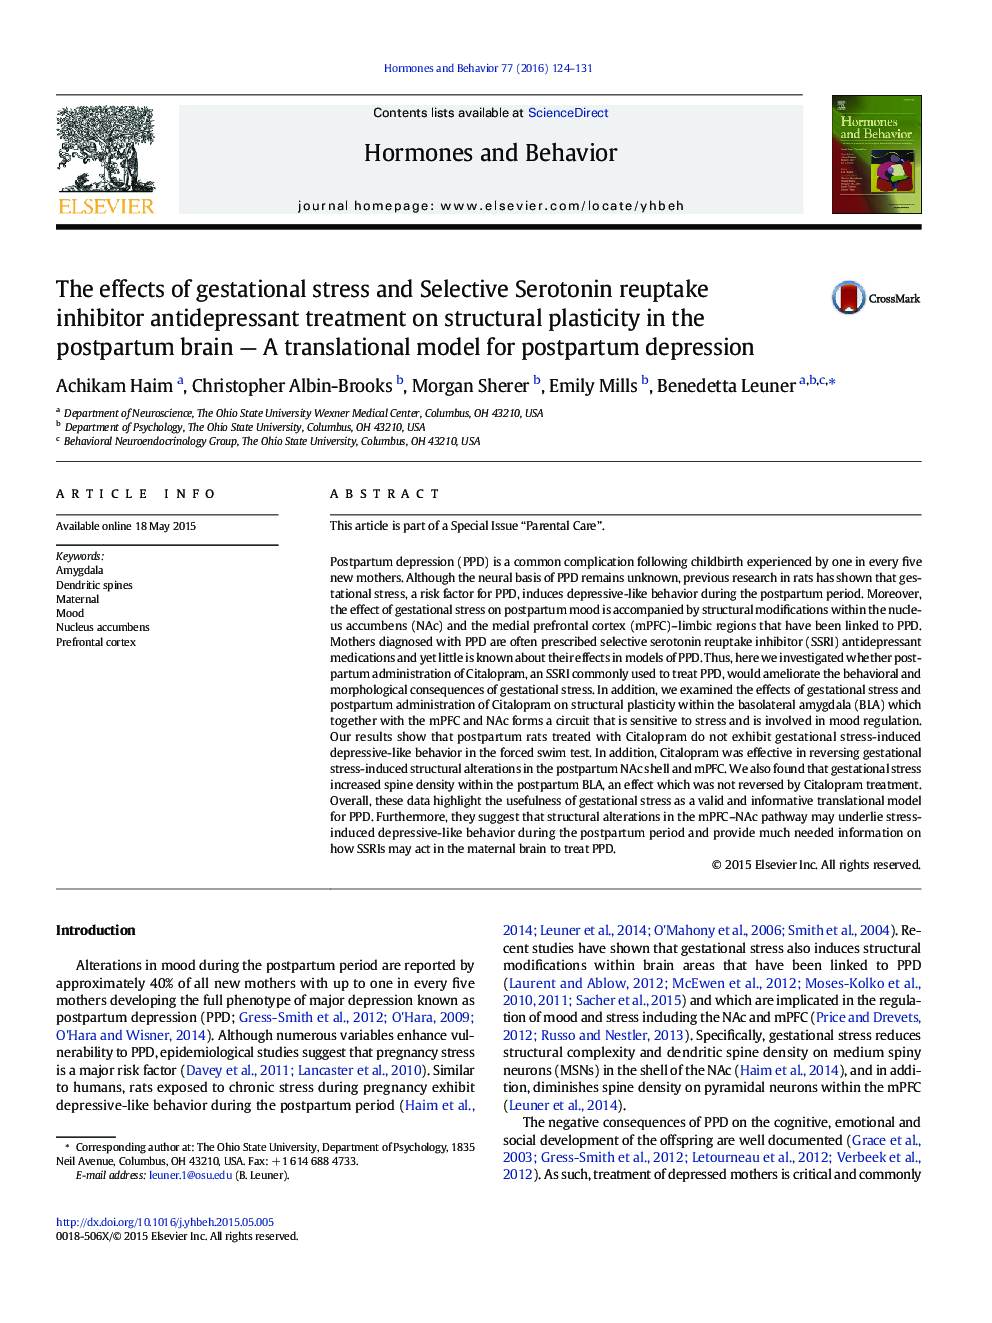 The effects of gestational stress and Selective Serotonin reuptake inhibitor antidepressant treatment on structural plasticity in the postpartum brain — A translational model for postpartum depression